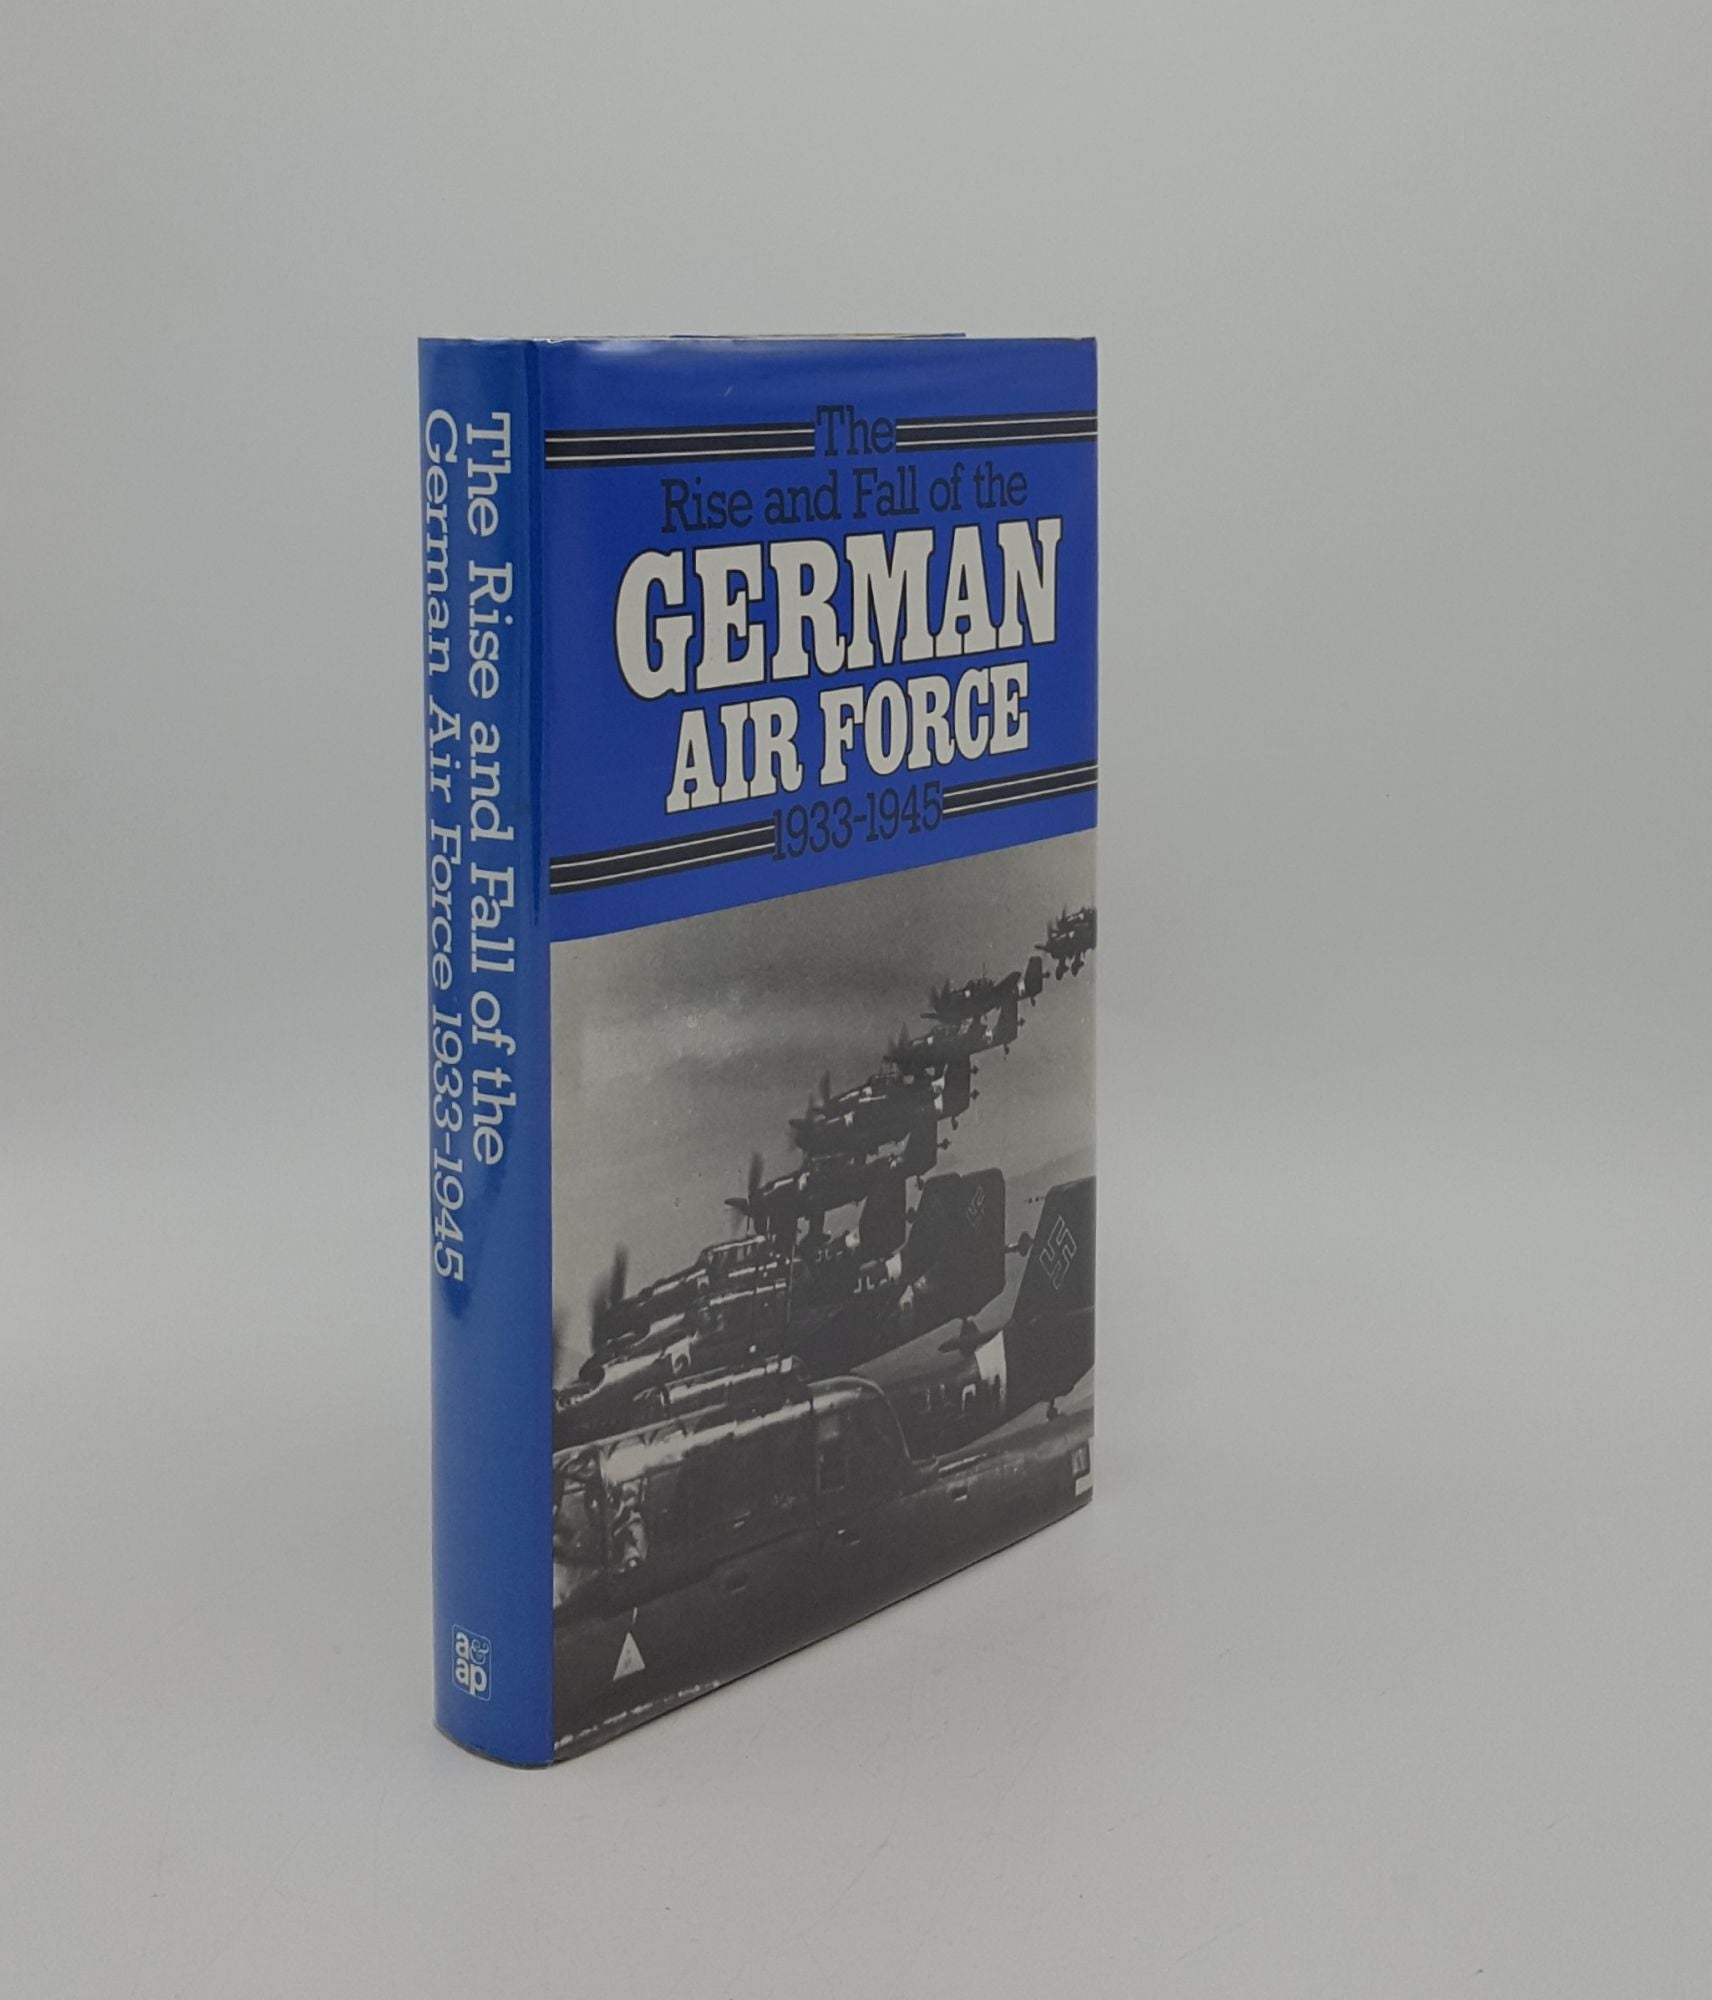 PROBERT H.A. - The Rise and Fall of the German Air Force 1933-1945